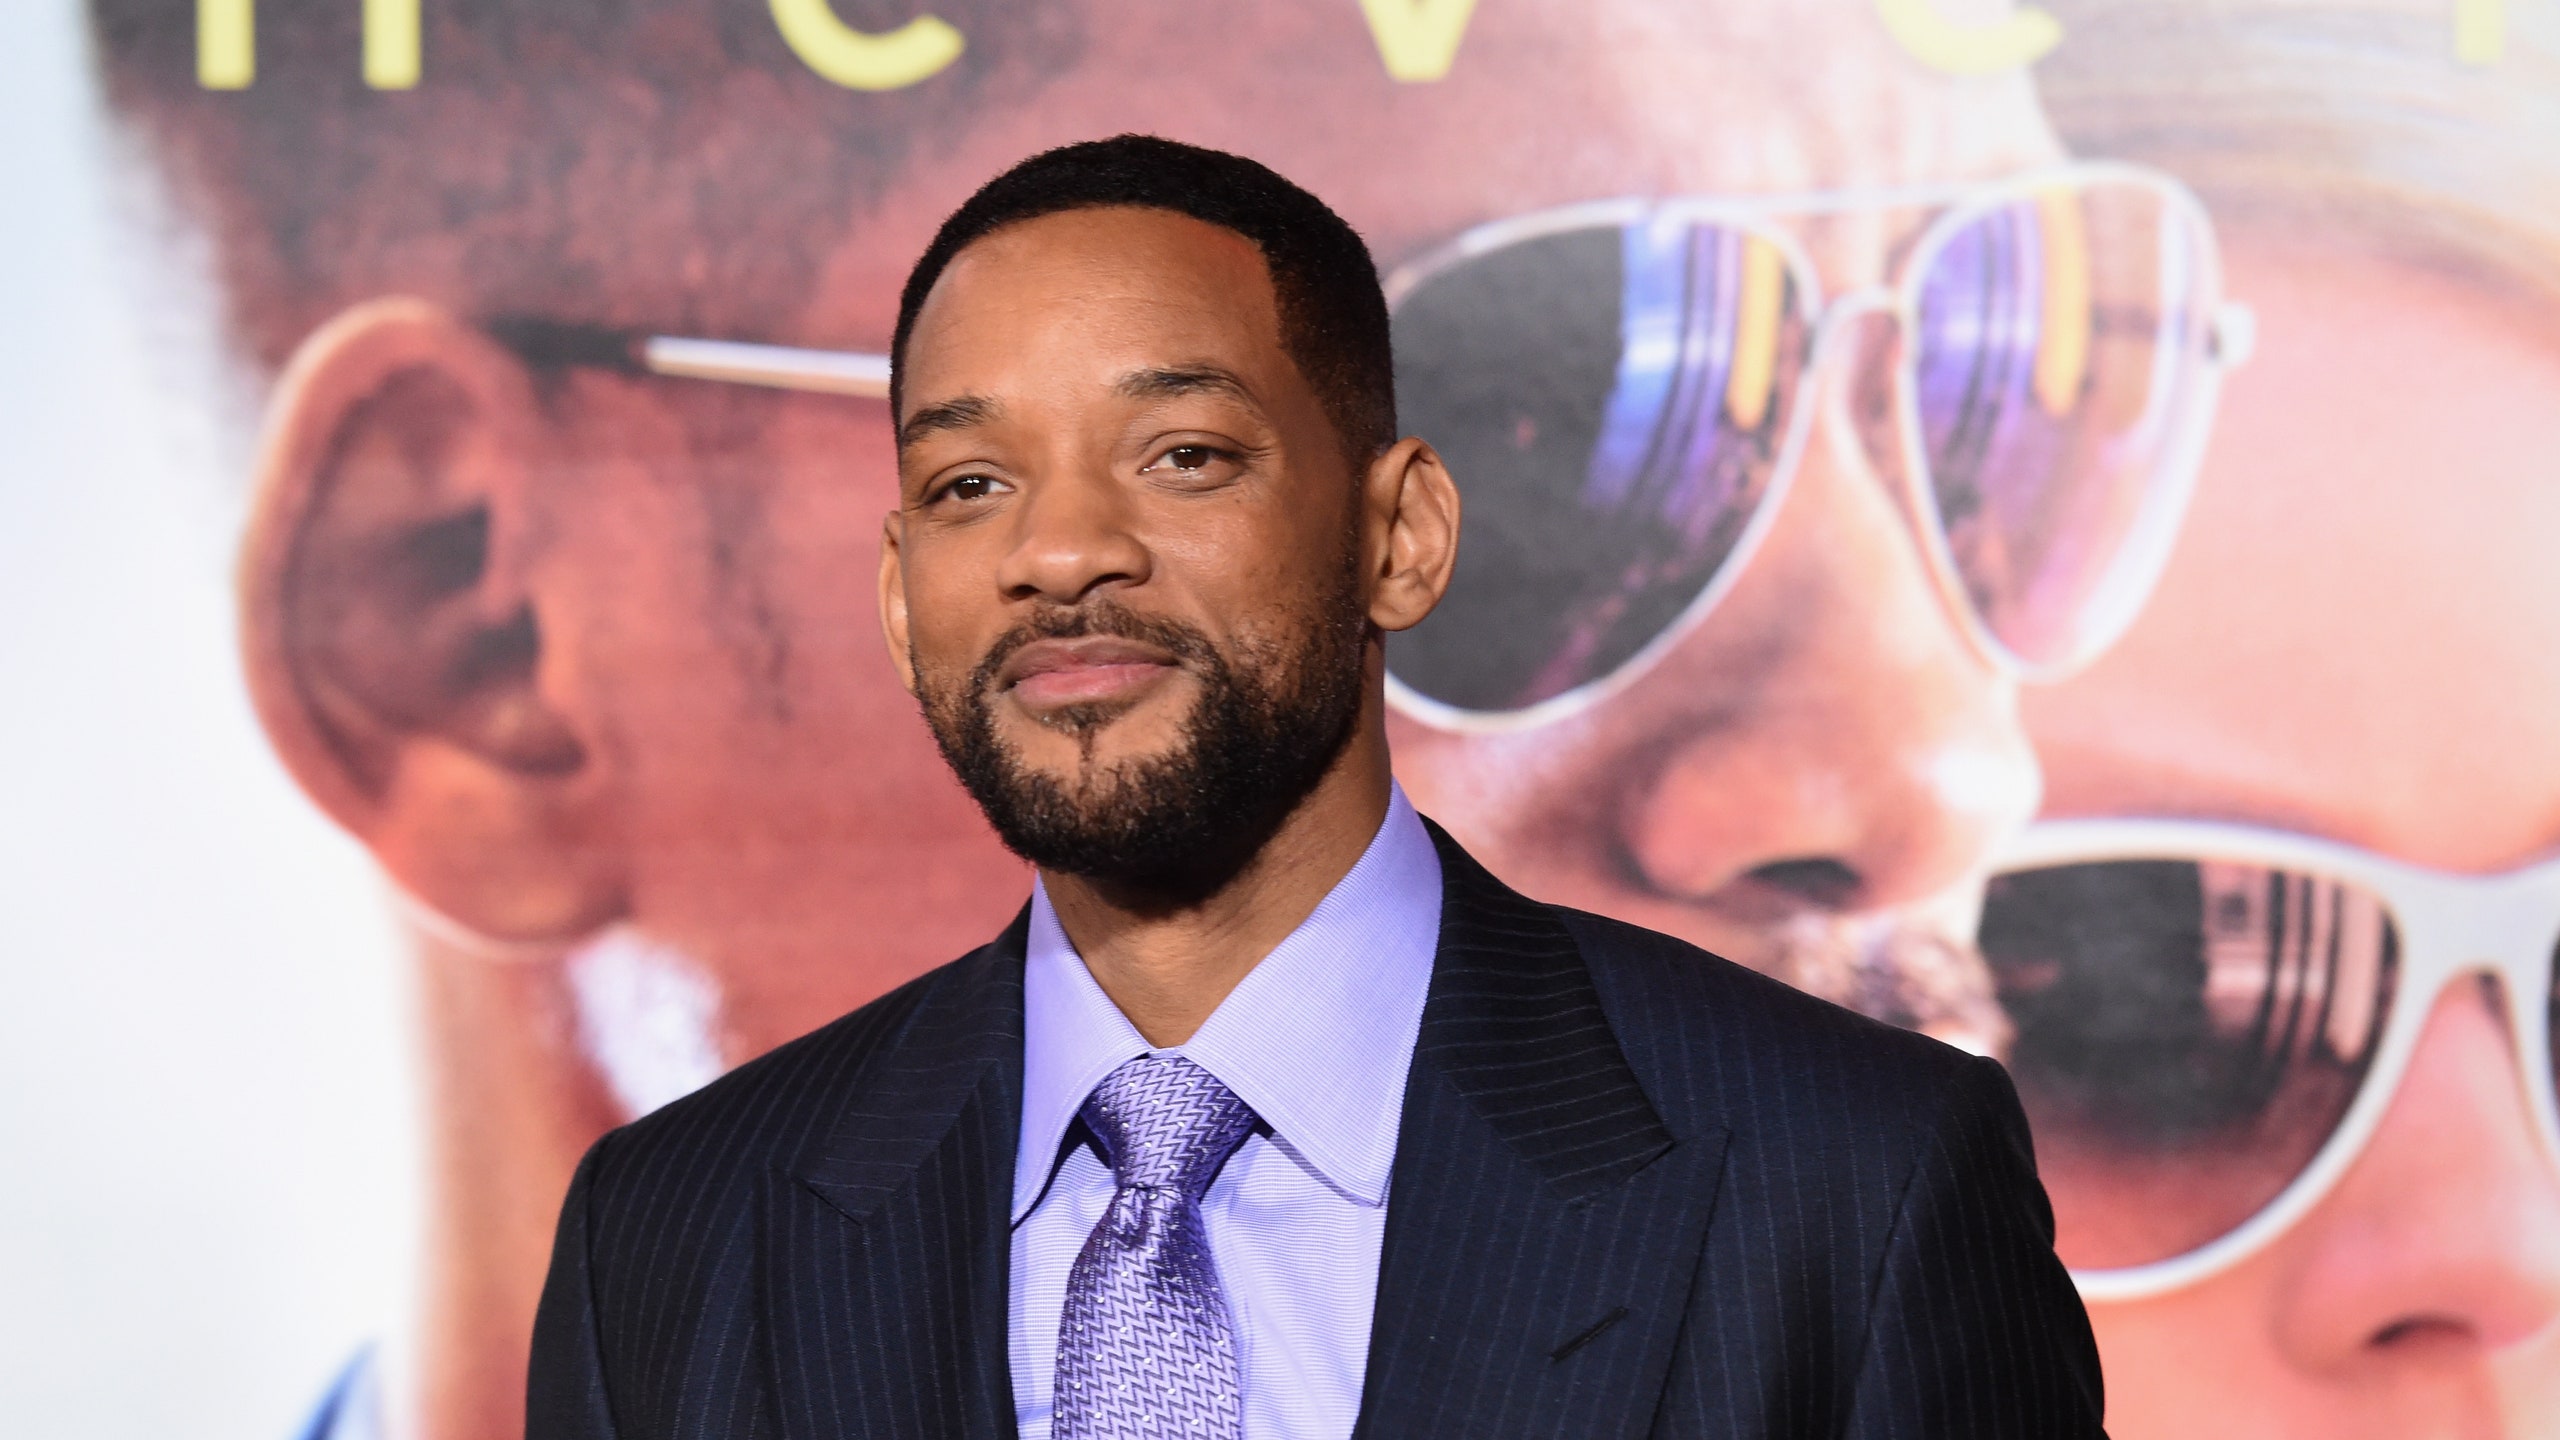 HOLLYWOOD CA  FEBRUARY 24  Actor Will Smith attends the Warner Bros. Pictures' Focus premiere at TCL Chinese Theatre on...